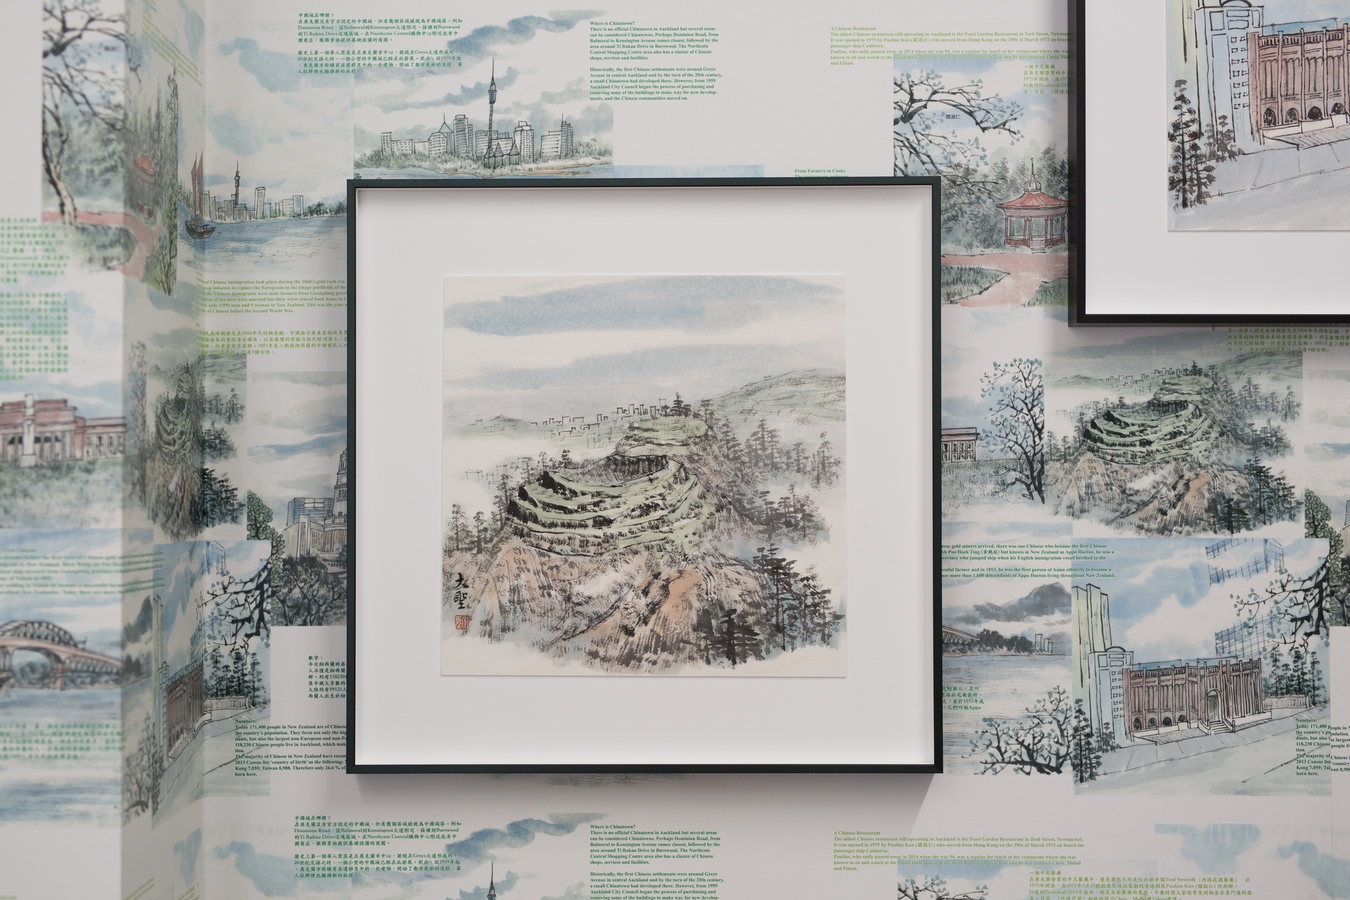 Image: Jun Yang, Àokèlán (detail), 2019, wallpaper with Chinese ink painting by Da Shen. Courtesy of Galerie Martin Janda in Vienna, Vitamin Creative Space in Beijing, and ShugoArts in Tokyo. Photo: Janneth Gil.